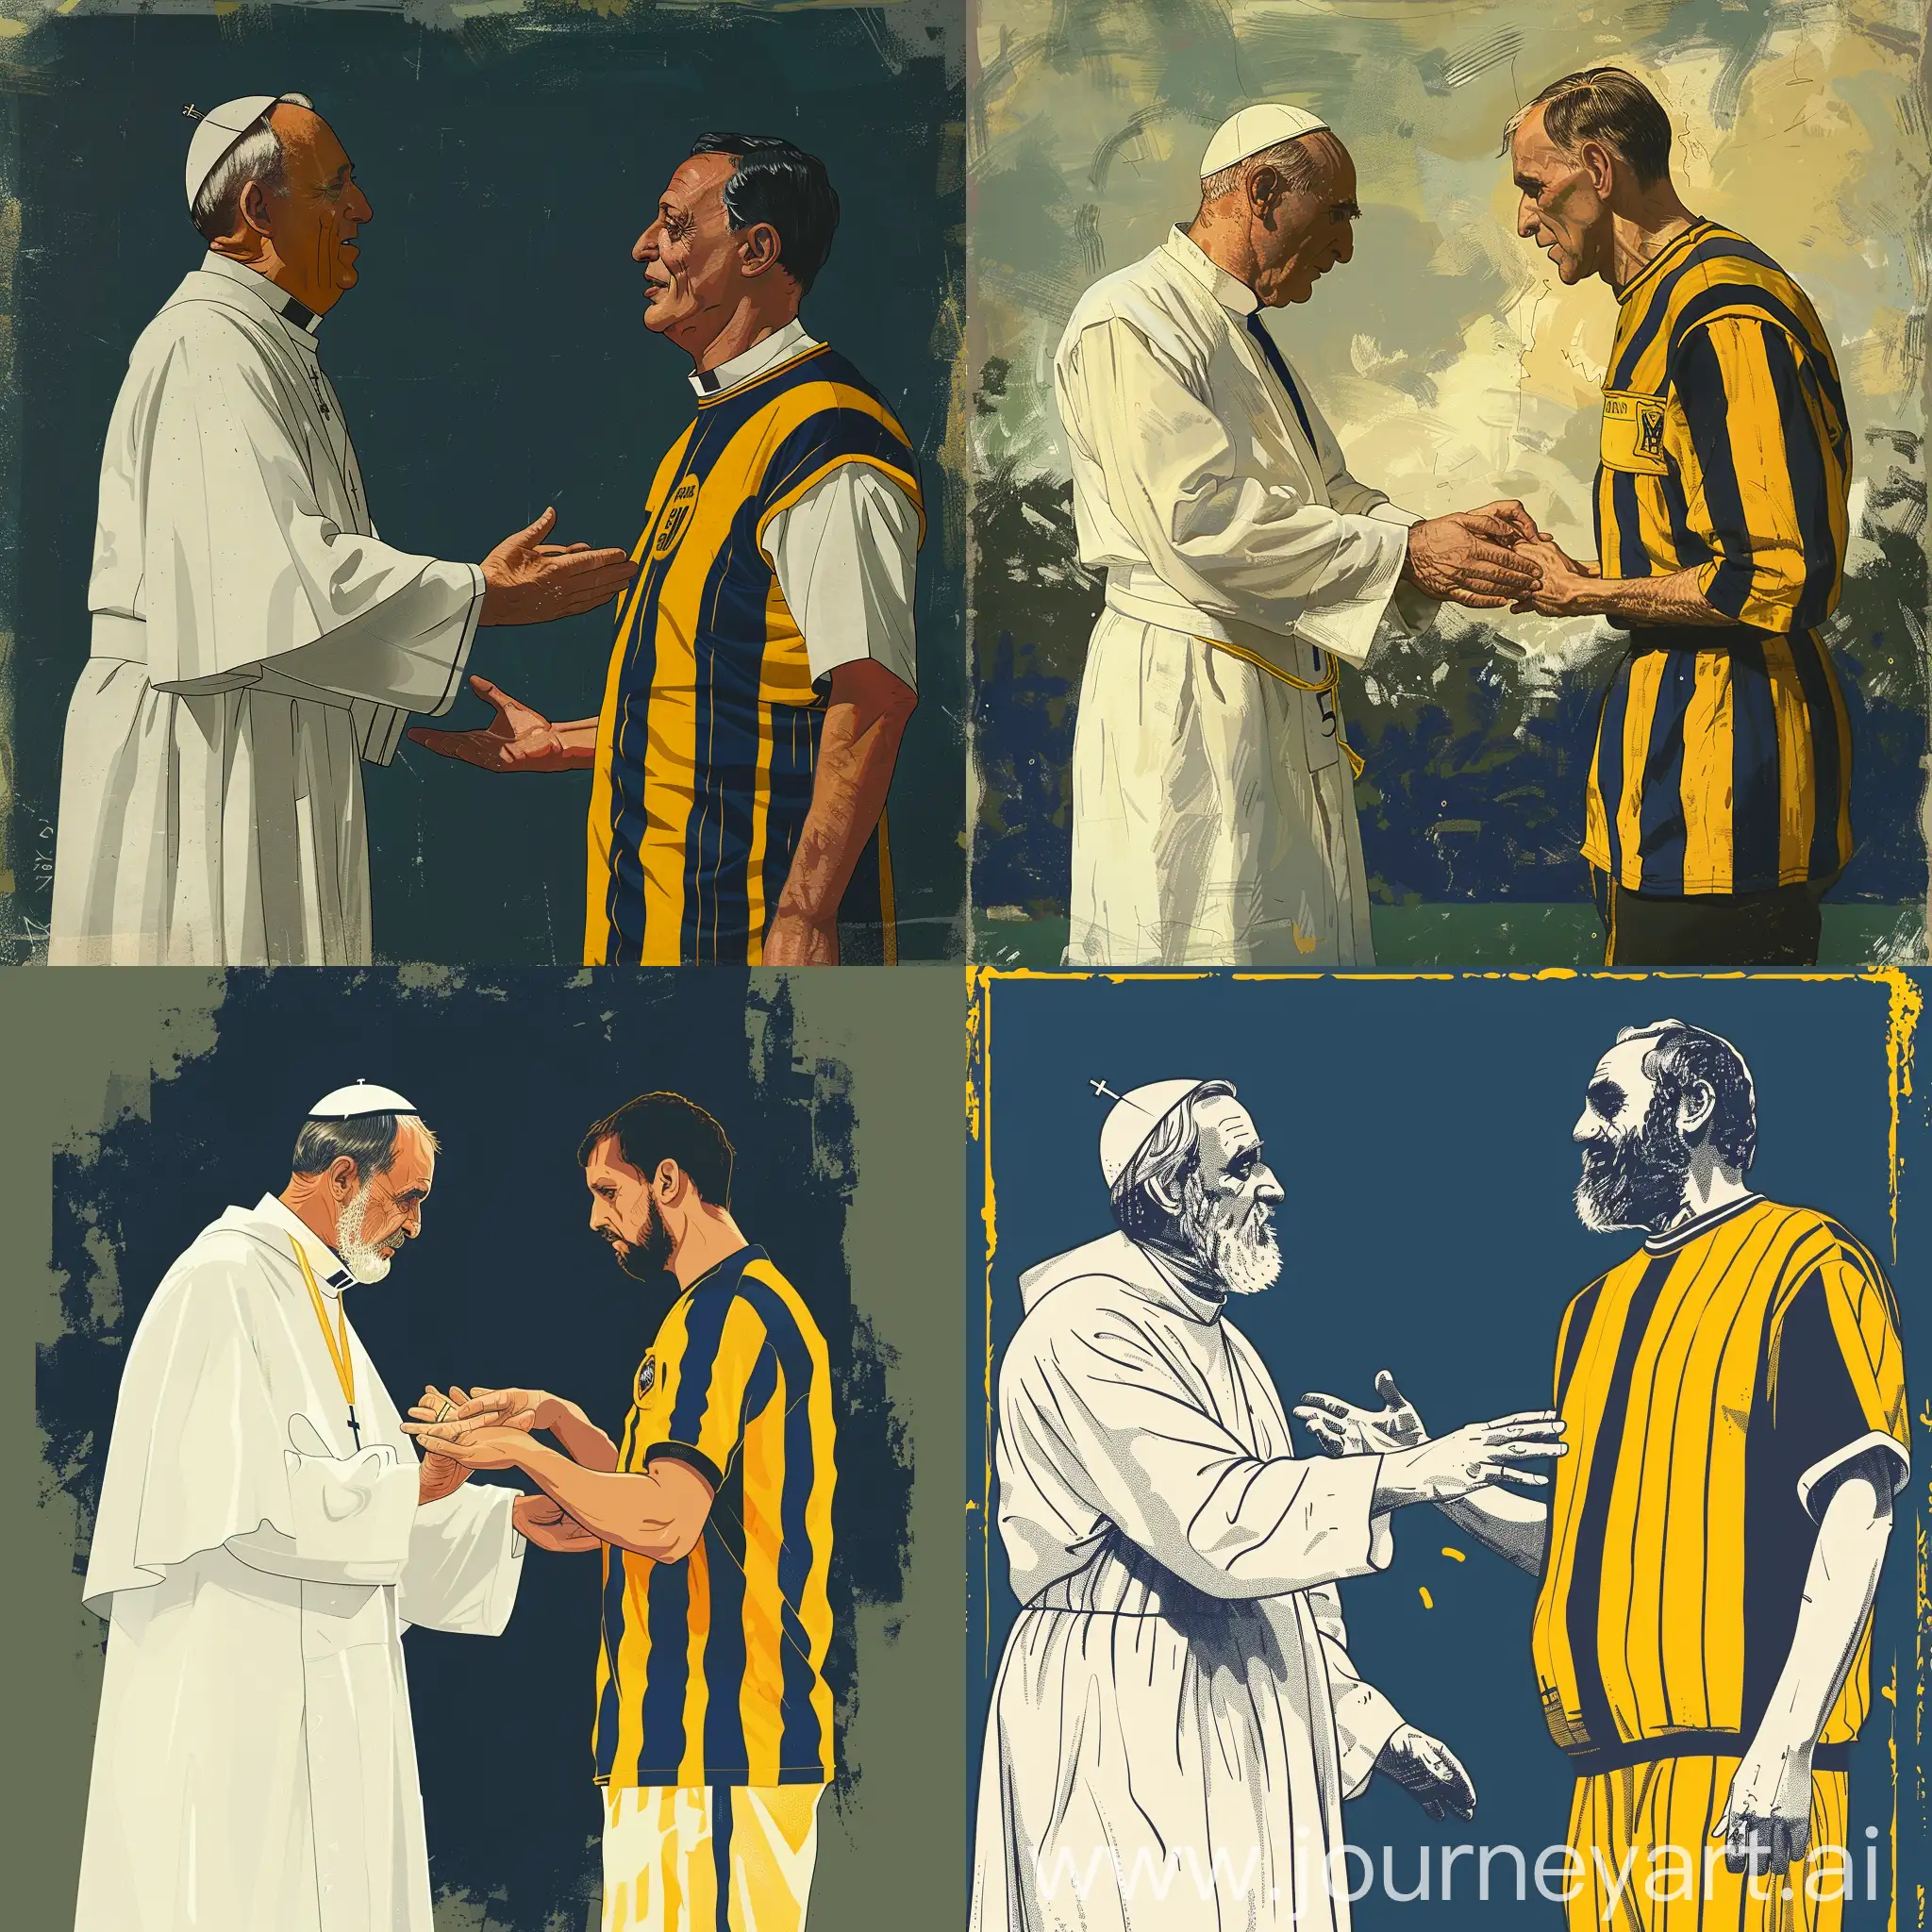 Clergyman-Presenting-a-Conspiracy-Document-to-a-Man-Symbolic-Illustration-in-Yellow-and-Dark-Blue